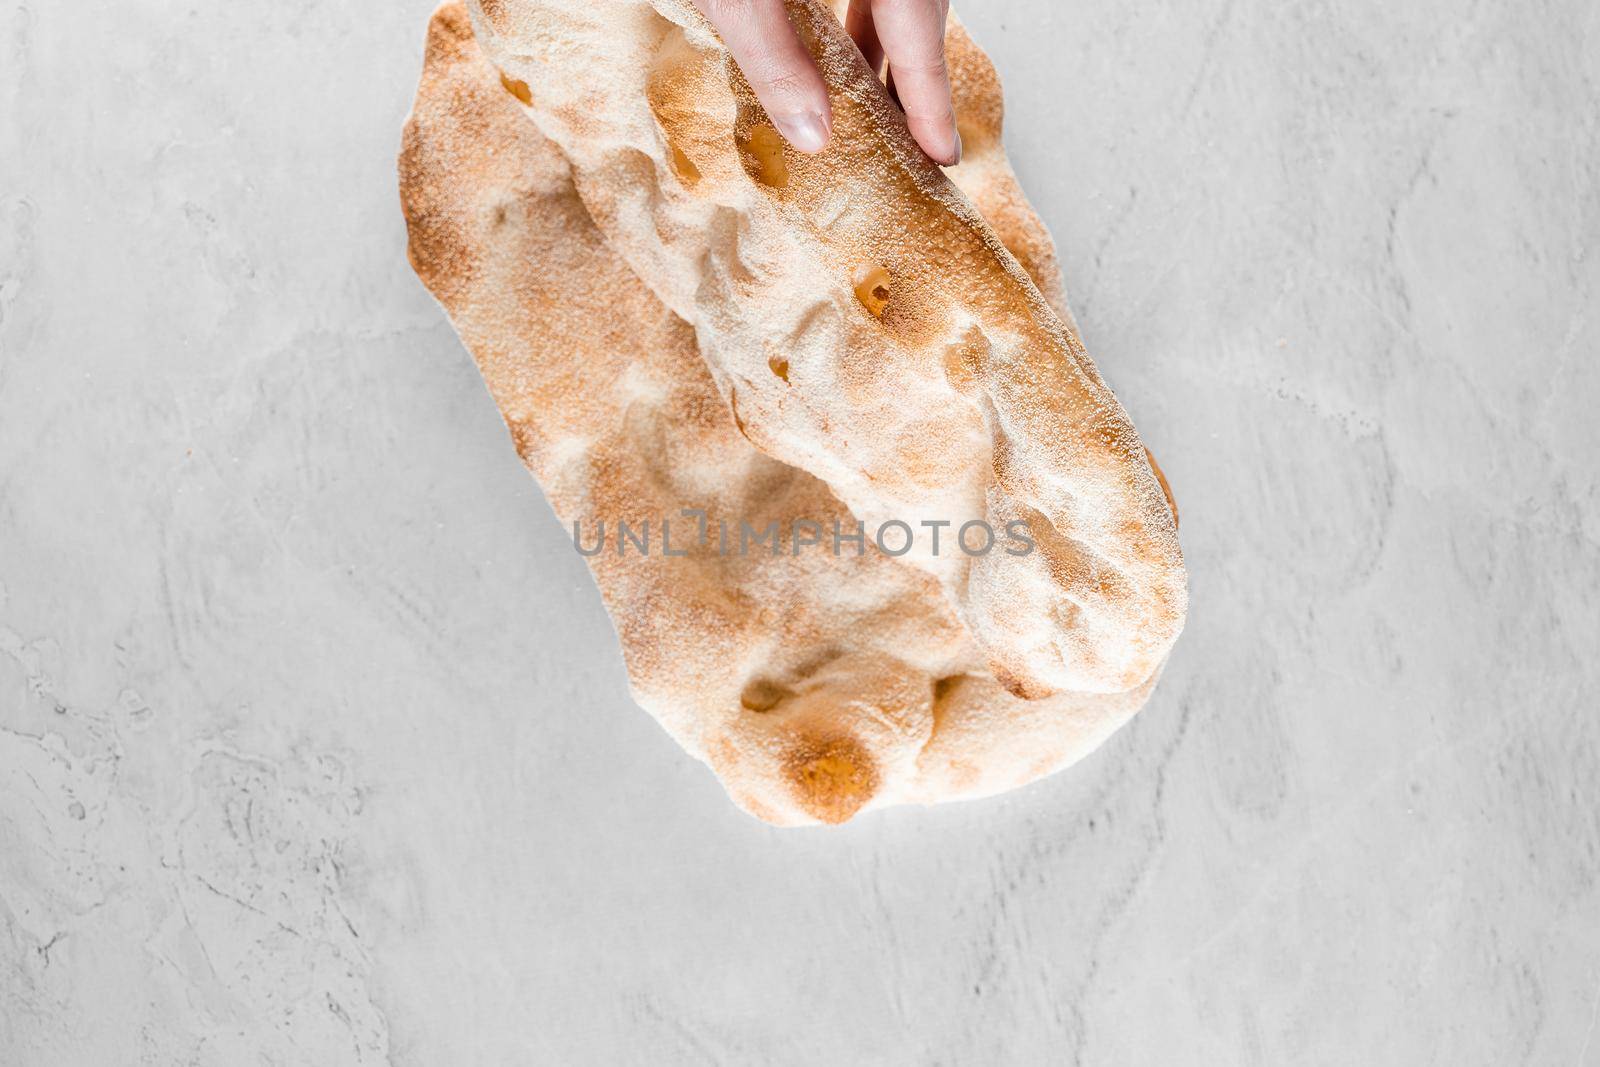 Touching and checking quality dough for pinsa romana on light background. Gourmet italian cuisine